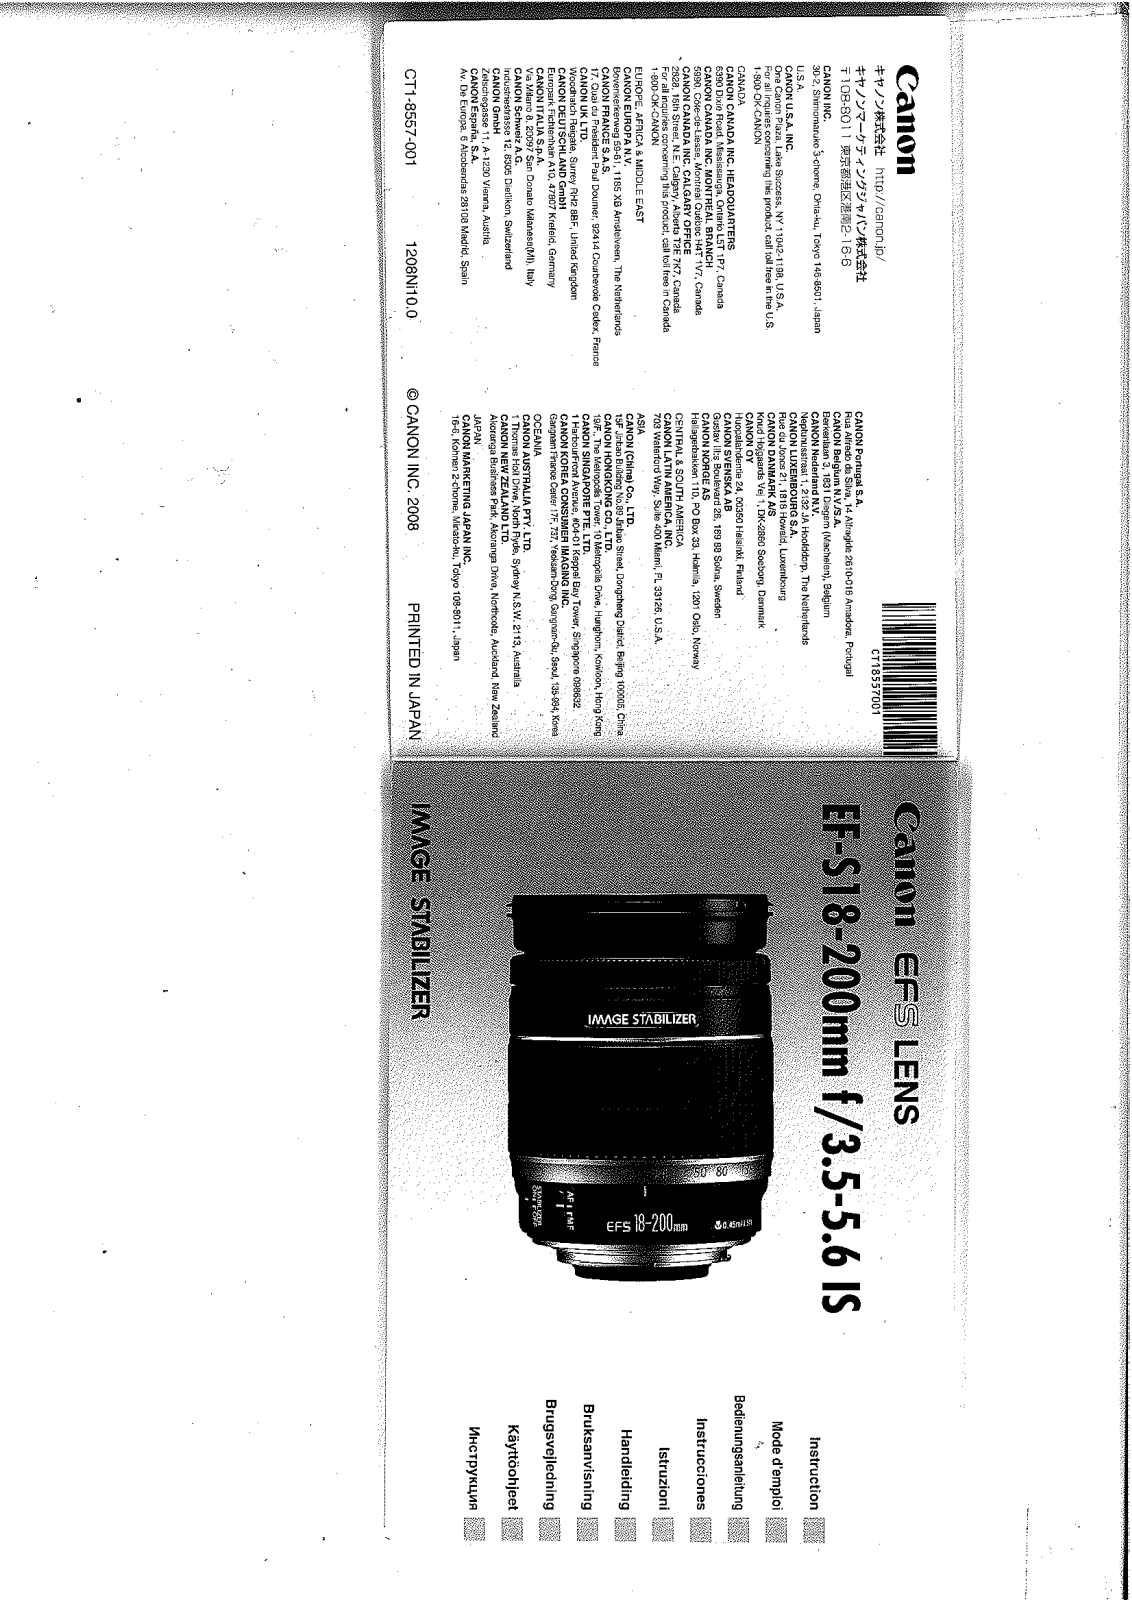 Canon EF-S 18-200 MM 3.5-5.6 IS User Manual